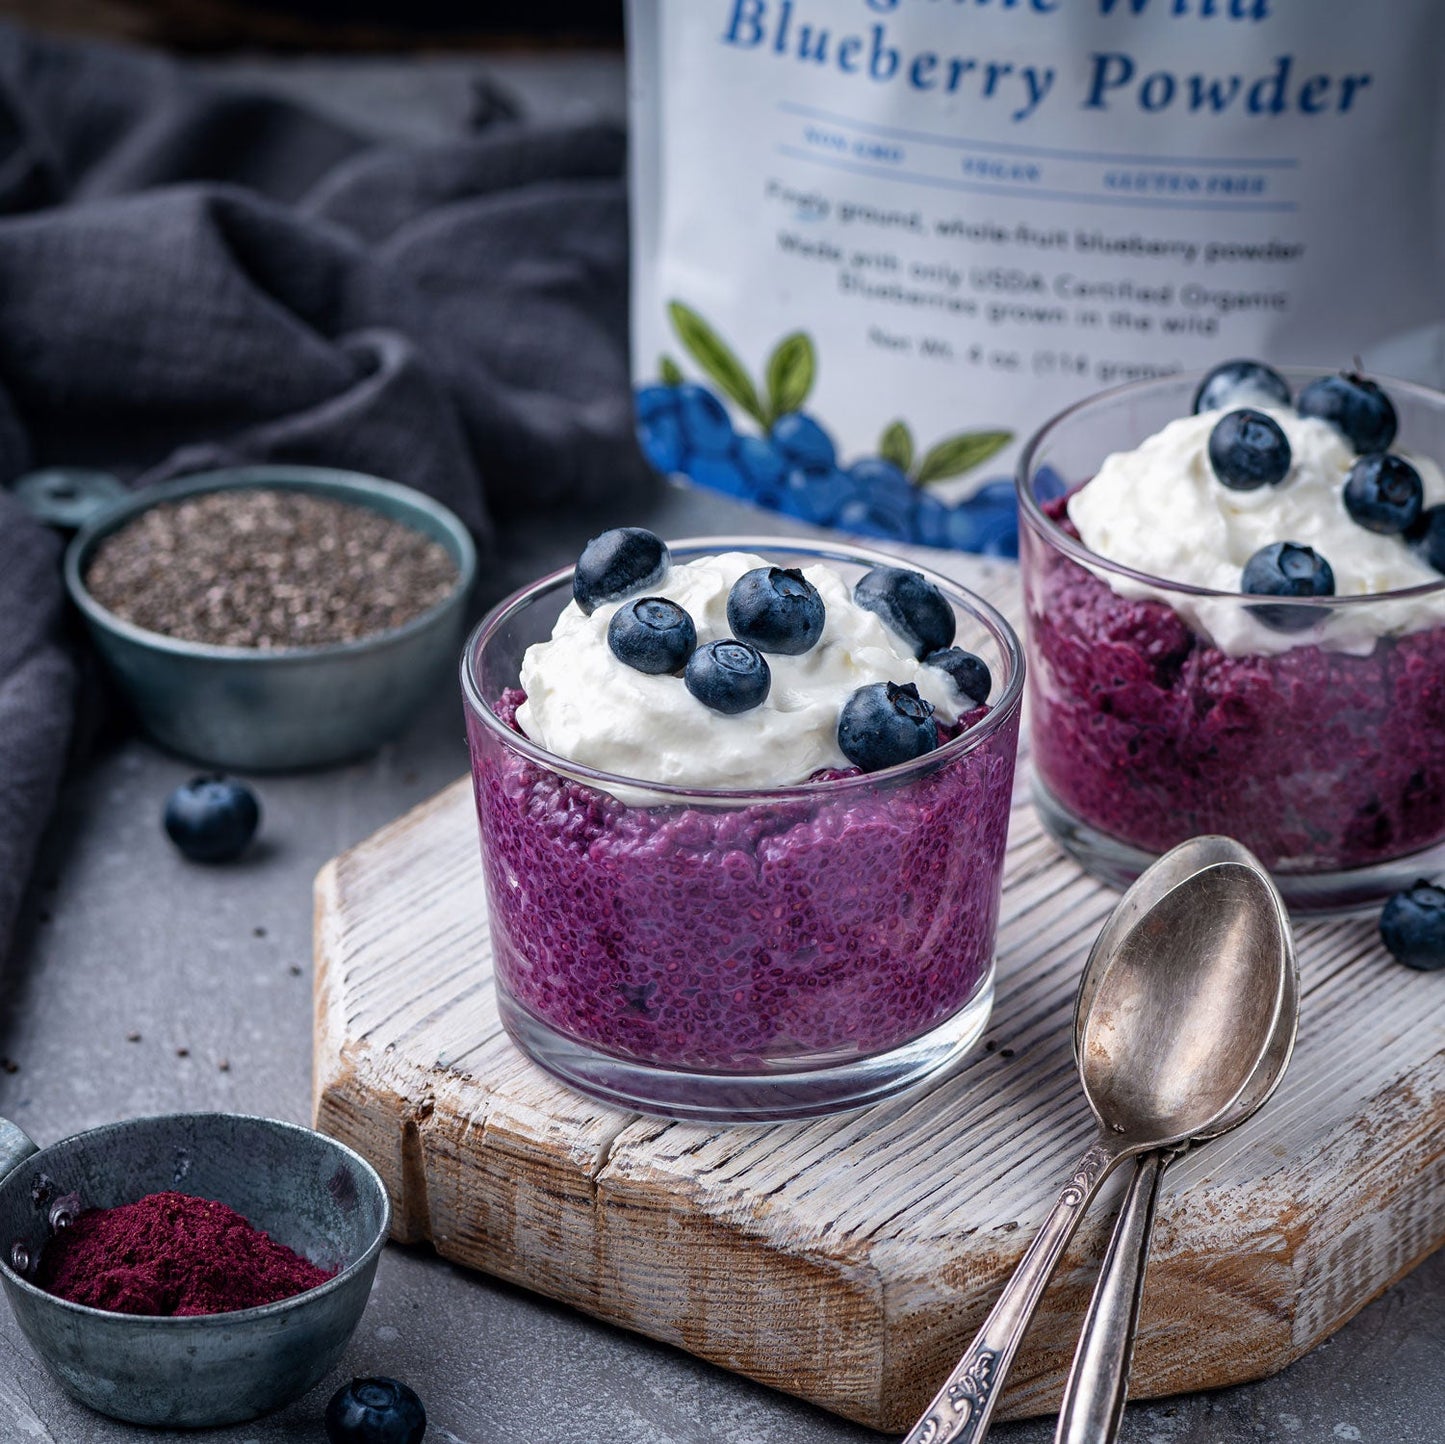 Wild Blueberry Powder Chia Seed Pudding topped with wild blueberries set on a rustic table